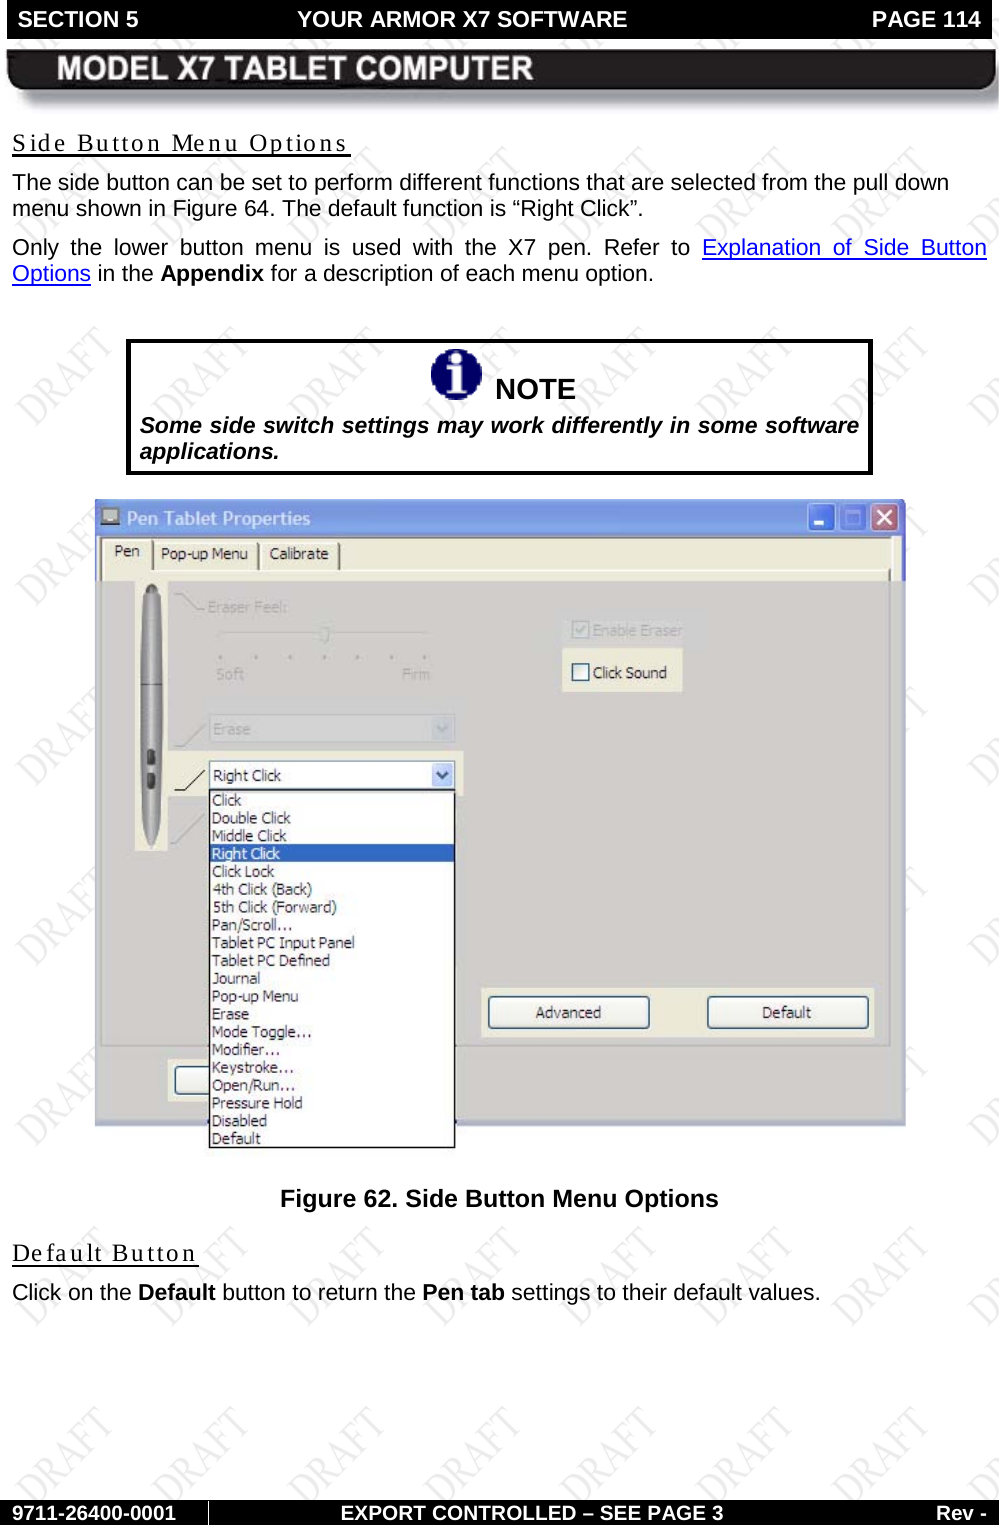 SECTION 5 YOUR ARMOR X7 SOFTWARE  PAGE 114        9711-26400-0001 EXPORT CONTROLLED – SEE PAGE 3 Rev - Side Button Menu Options The side button can be set to perform different functions that are selected from the pull down menu shown in Figure 64. The default function is “Right Click”.  Only the lower button menu is used with the X7 pen. Refer to Explanation of Side Button Options in the Appendix for a description of each menu option.     NOTE Some side switch settings may work differently in some software applications.   Figure 62. Side Button Menu Options Default Button Click on the Default button to return the Pen tab settings to their default values.   